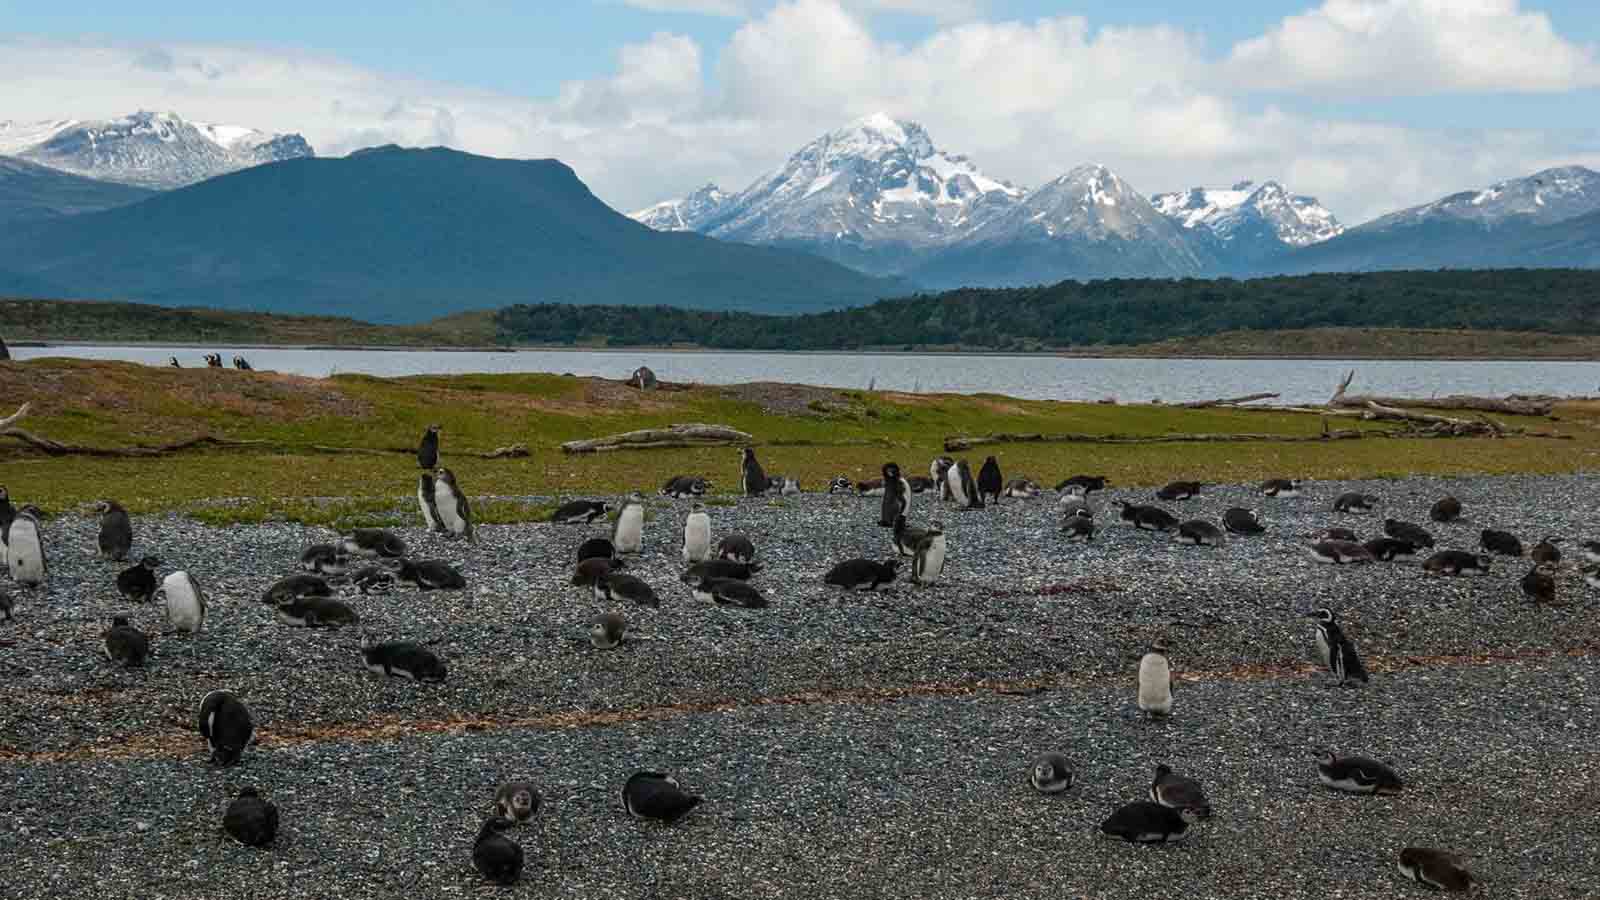  Patagonia | Beagle Channel